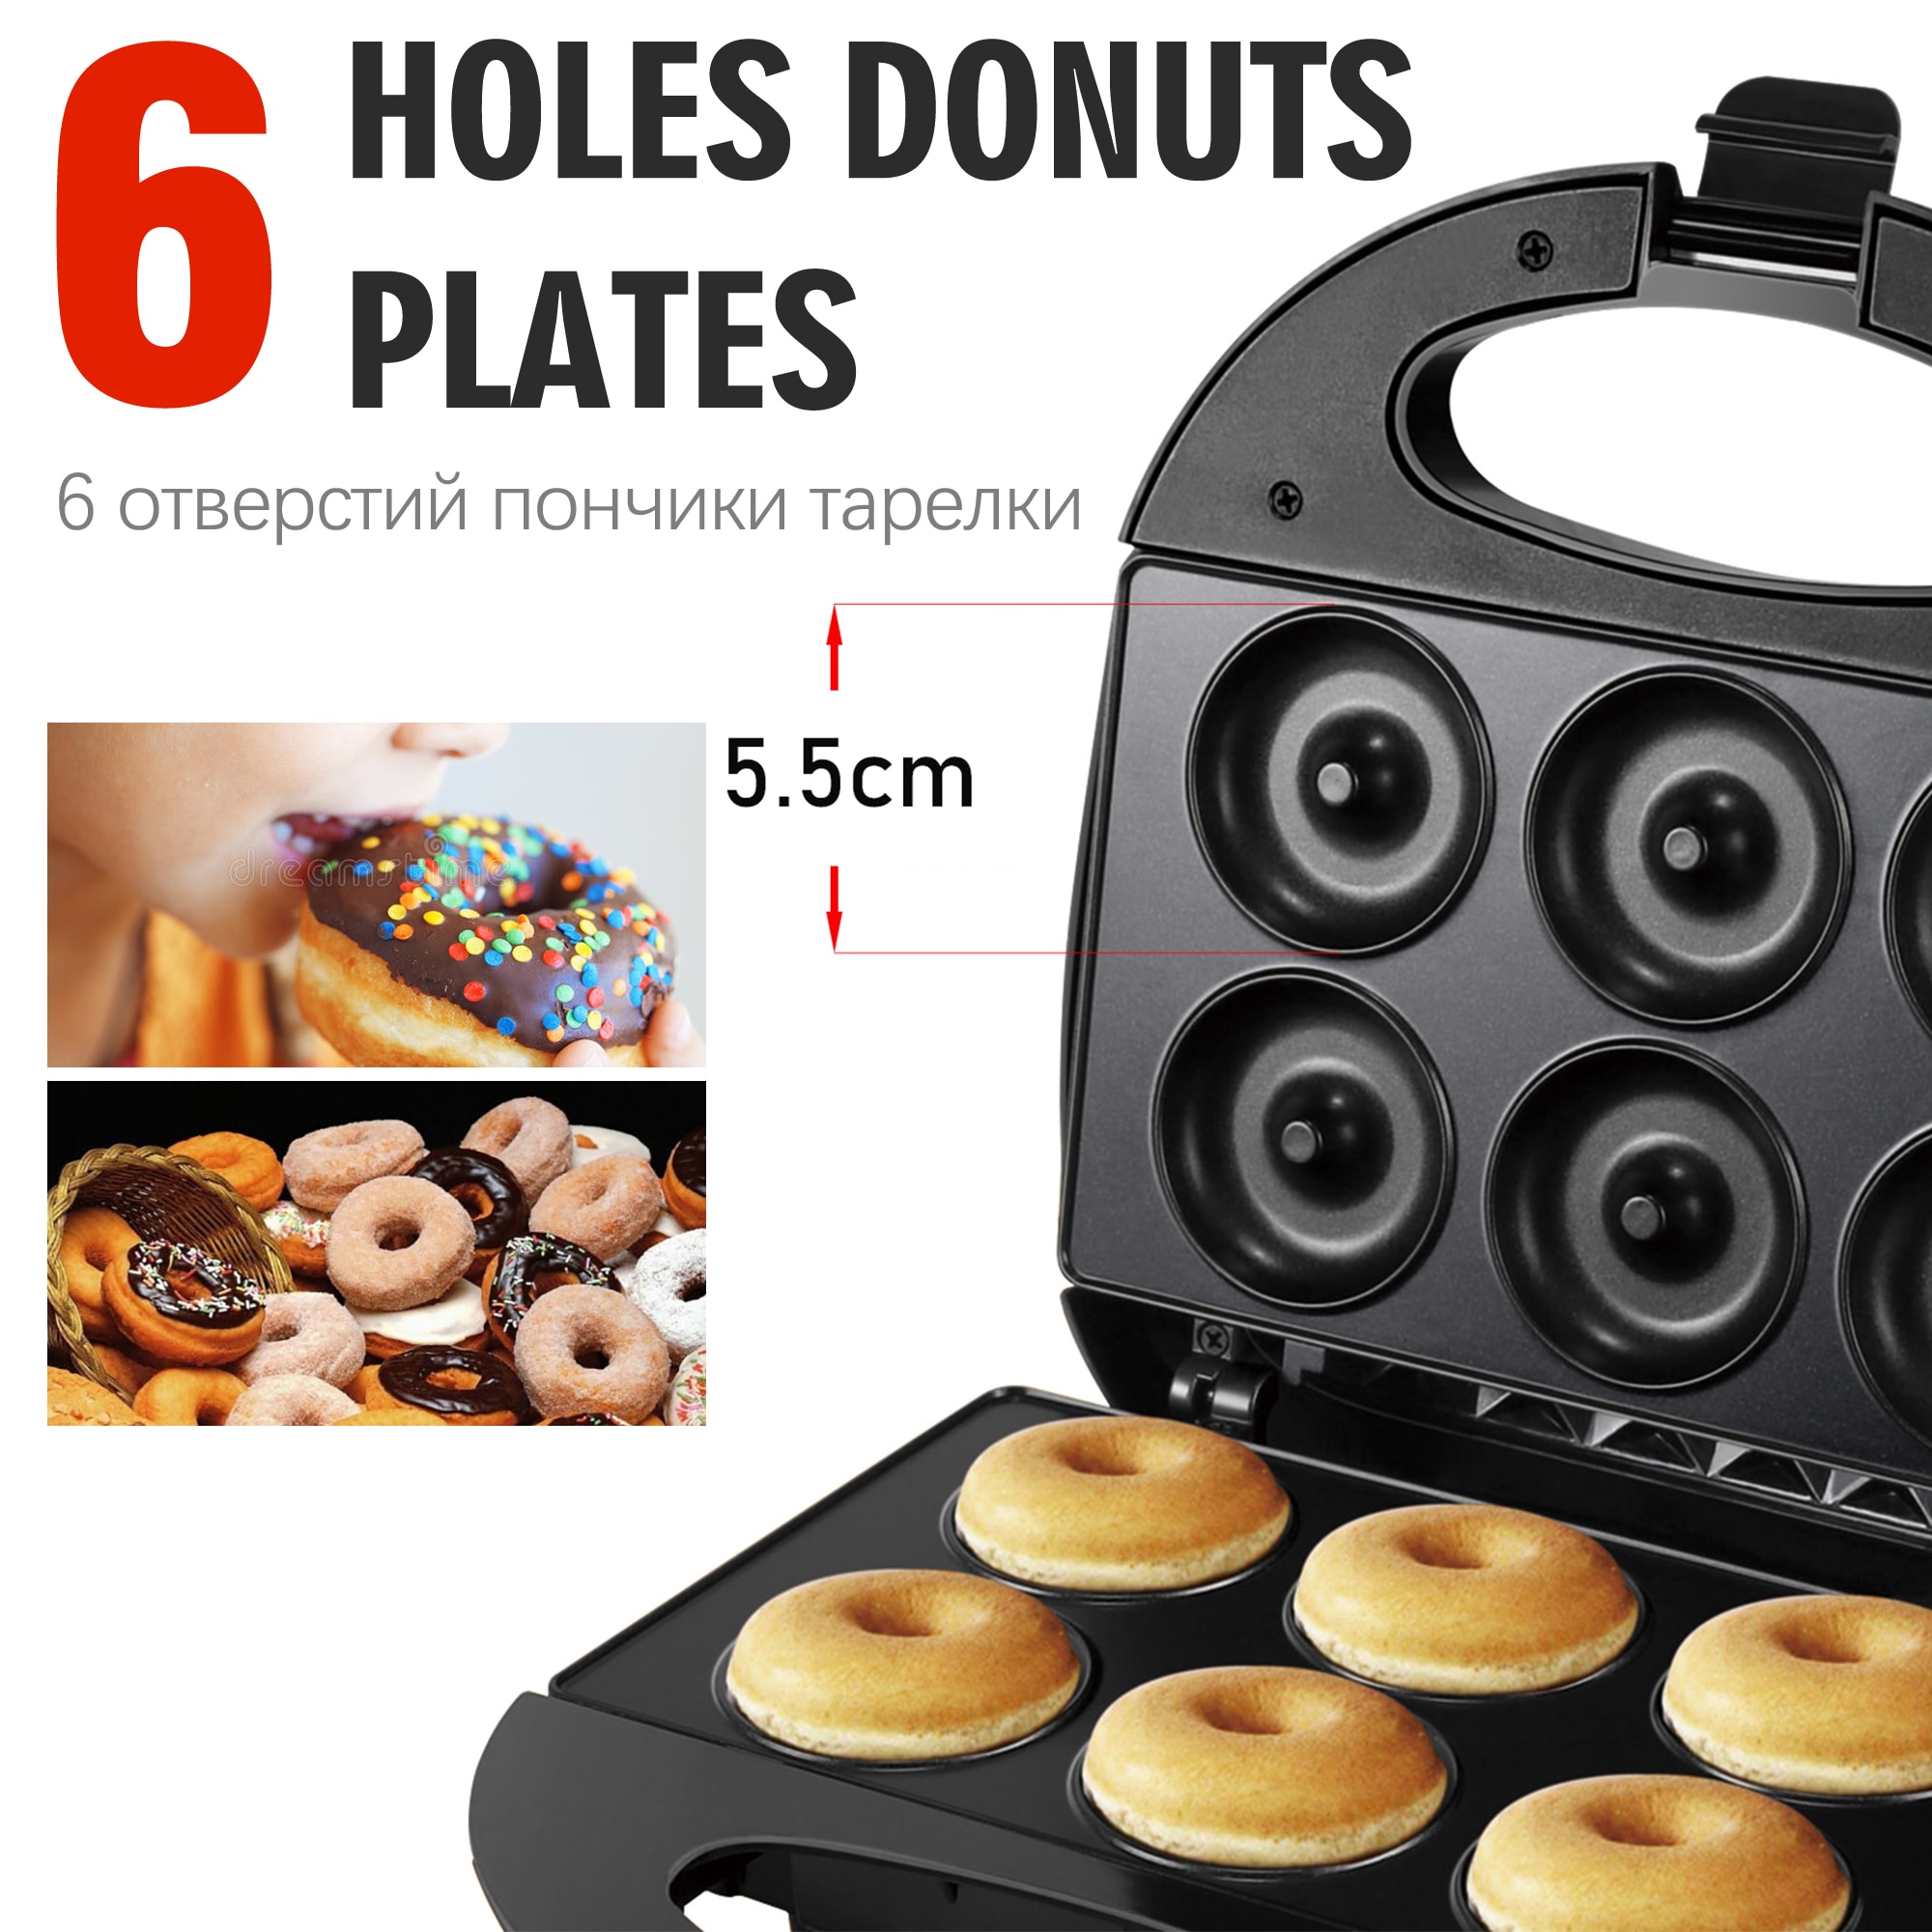 Home Donut Machine With Nonstick Coating